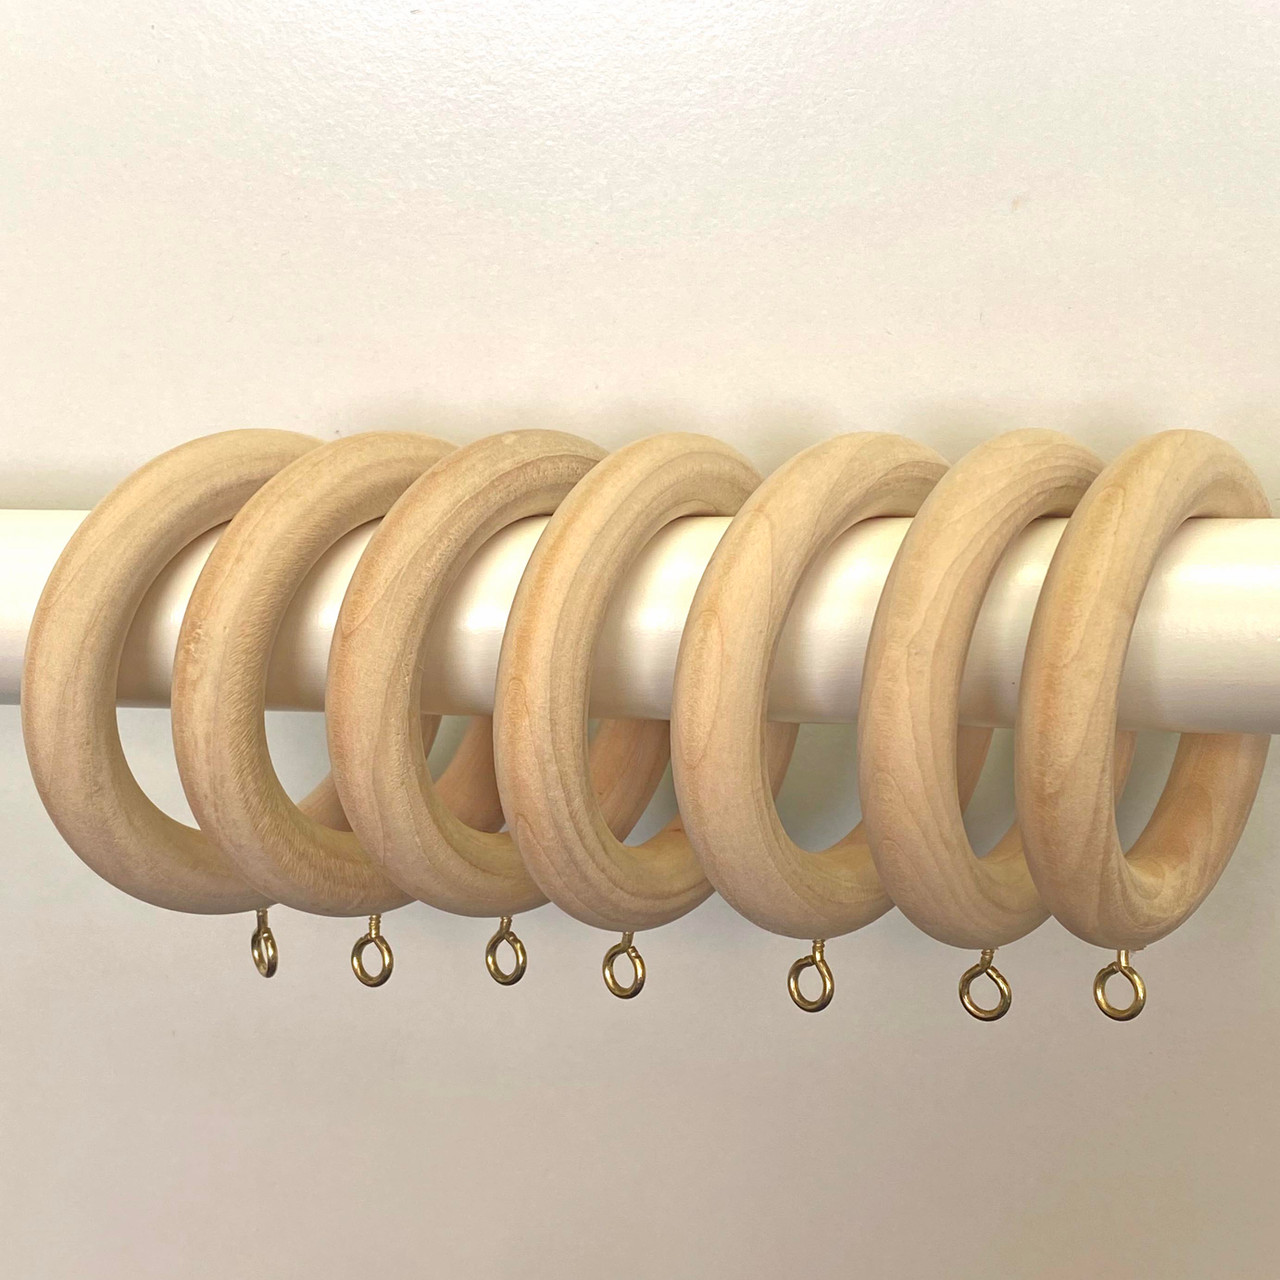 Wood Curtain Rings for Sale in Miami, FL - OfferUp